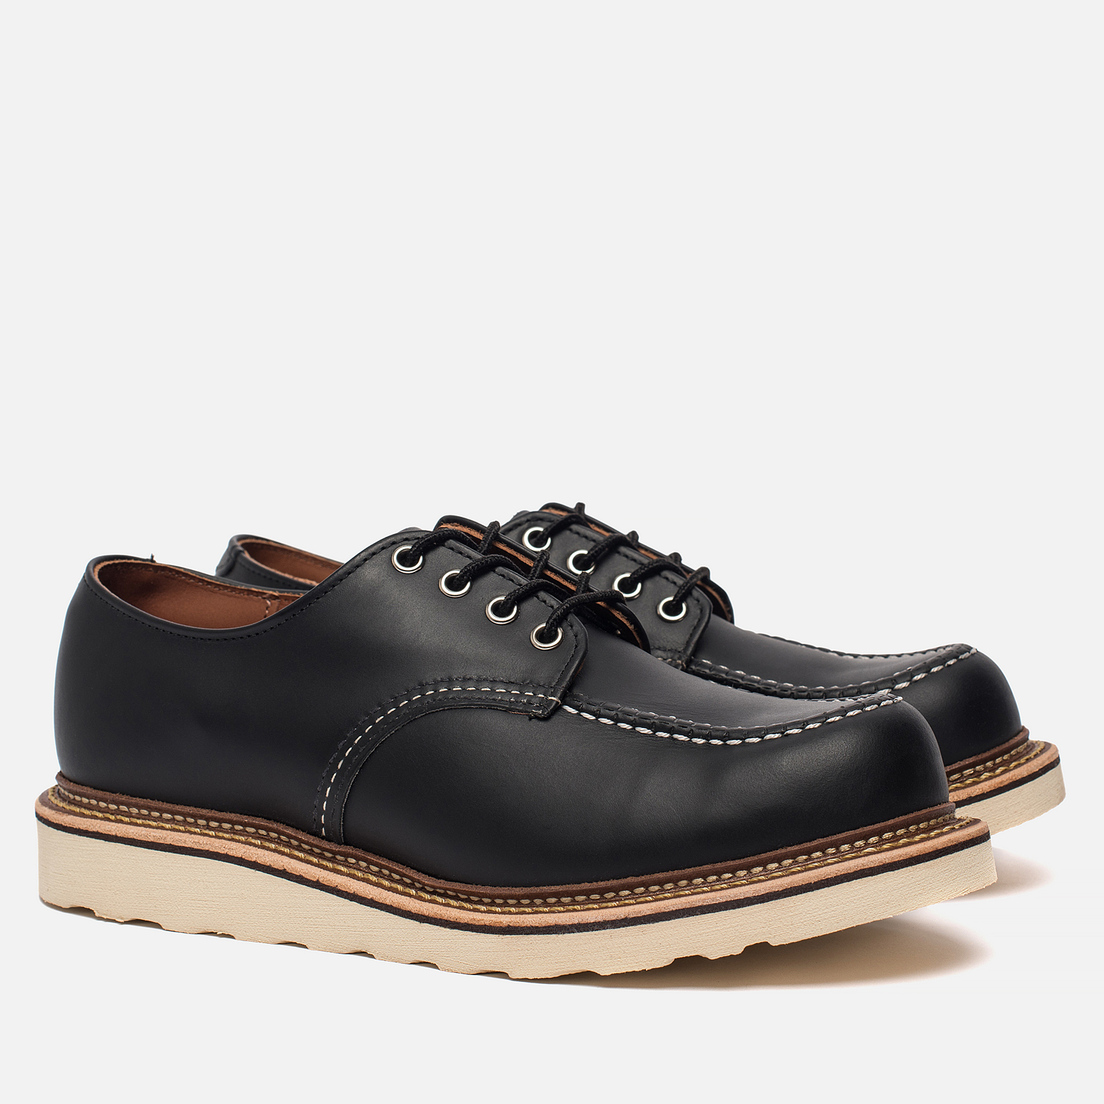 Red Wing Shoes Мужские ботинки 8106 Classic Oxford Leather